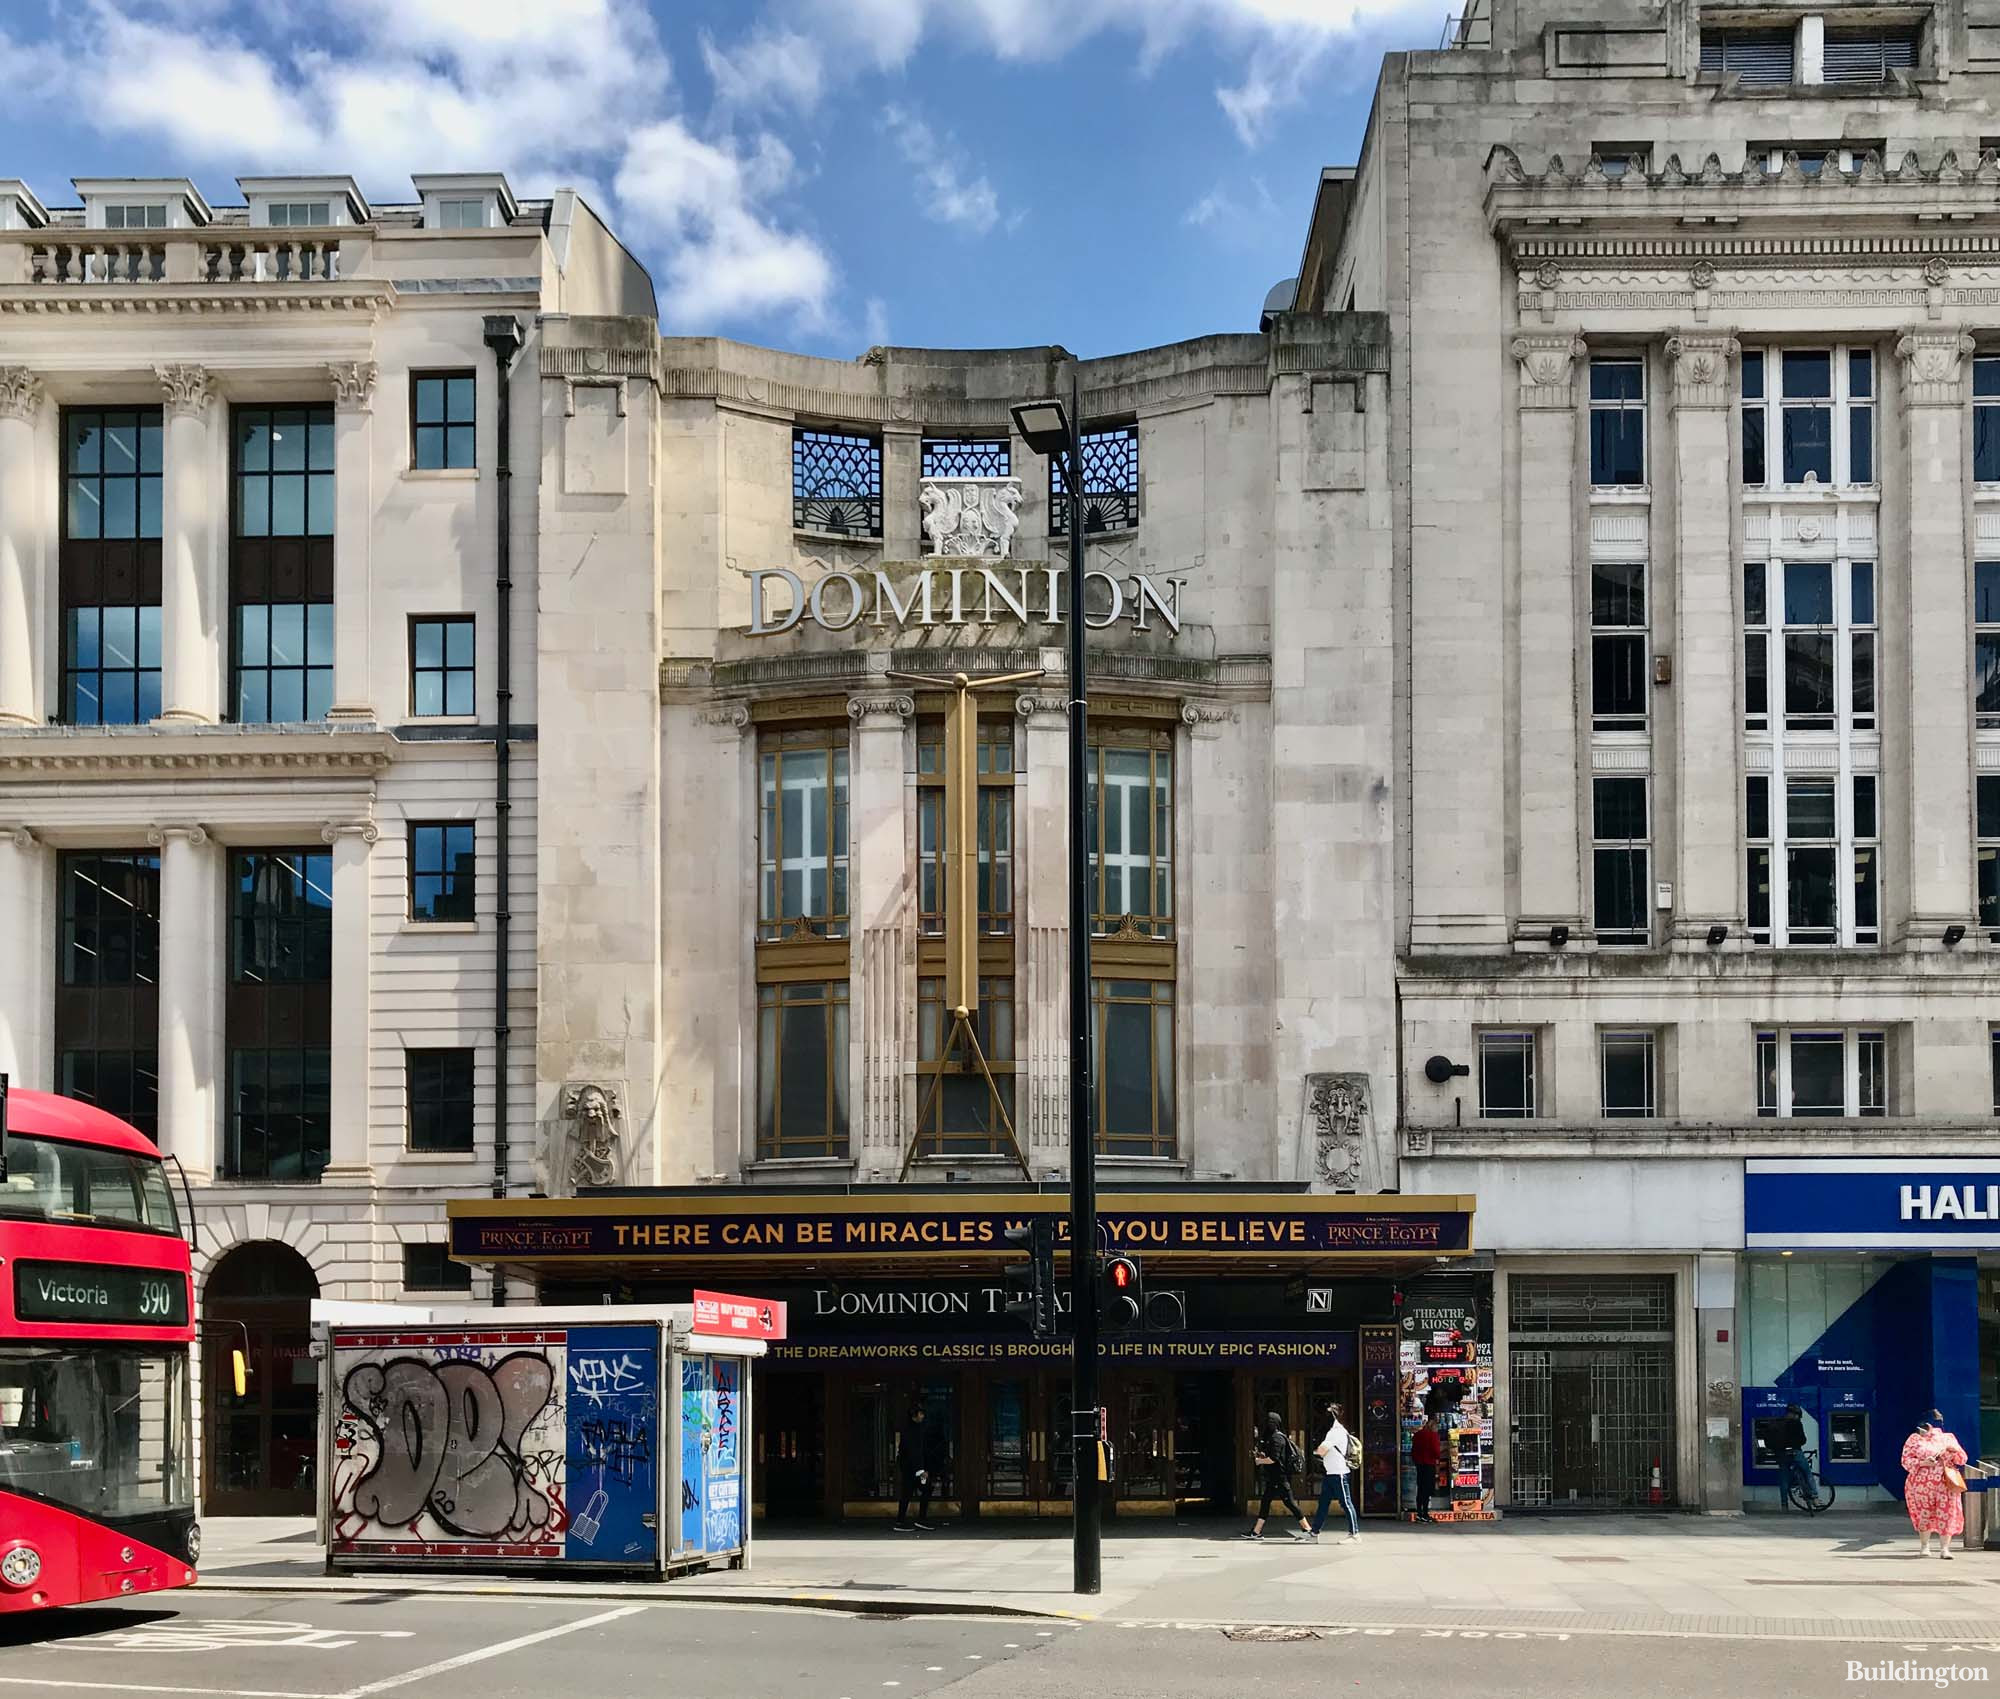 Dominion Theatre building on Tottenham Court Road in summer 2021.